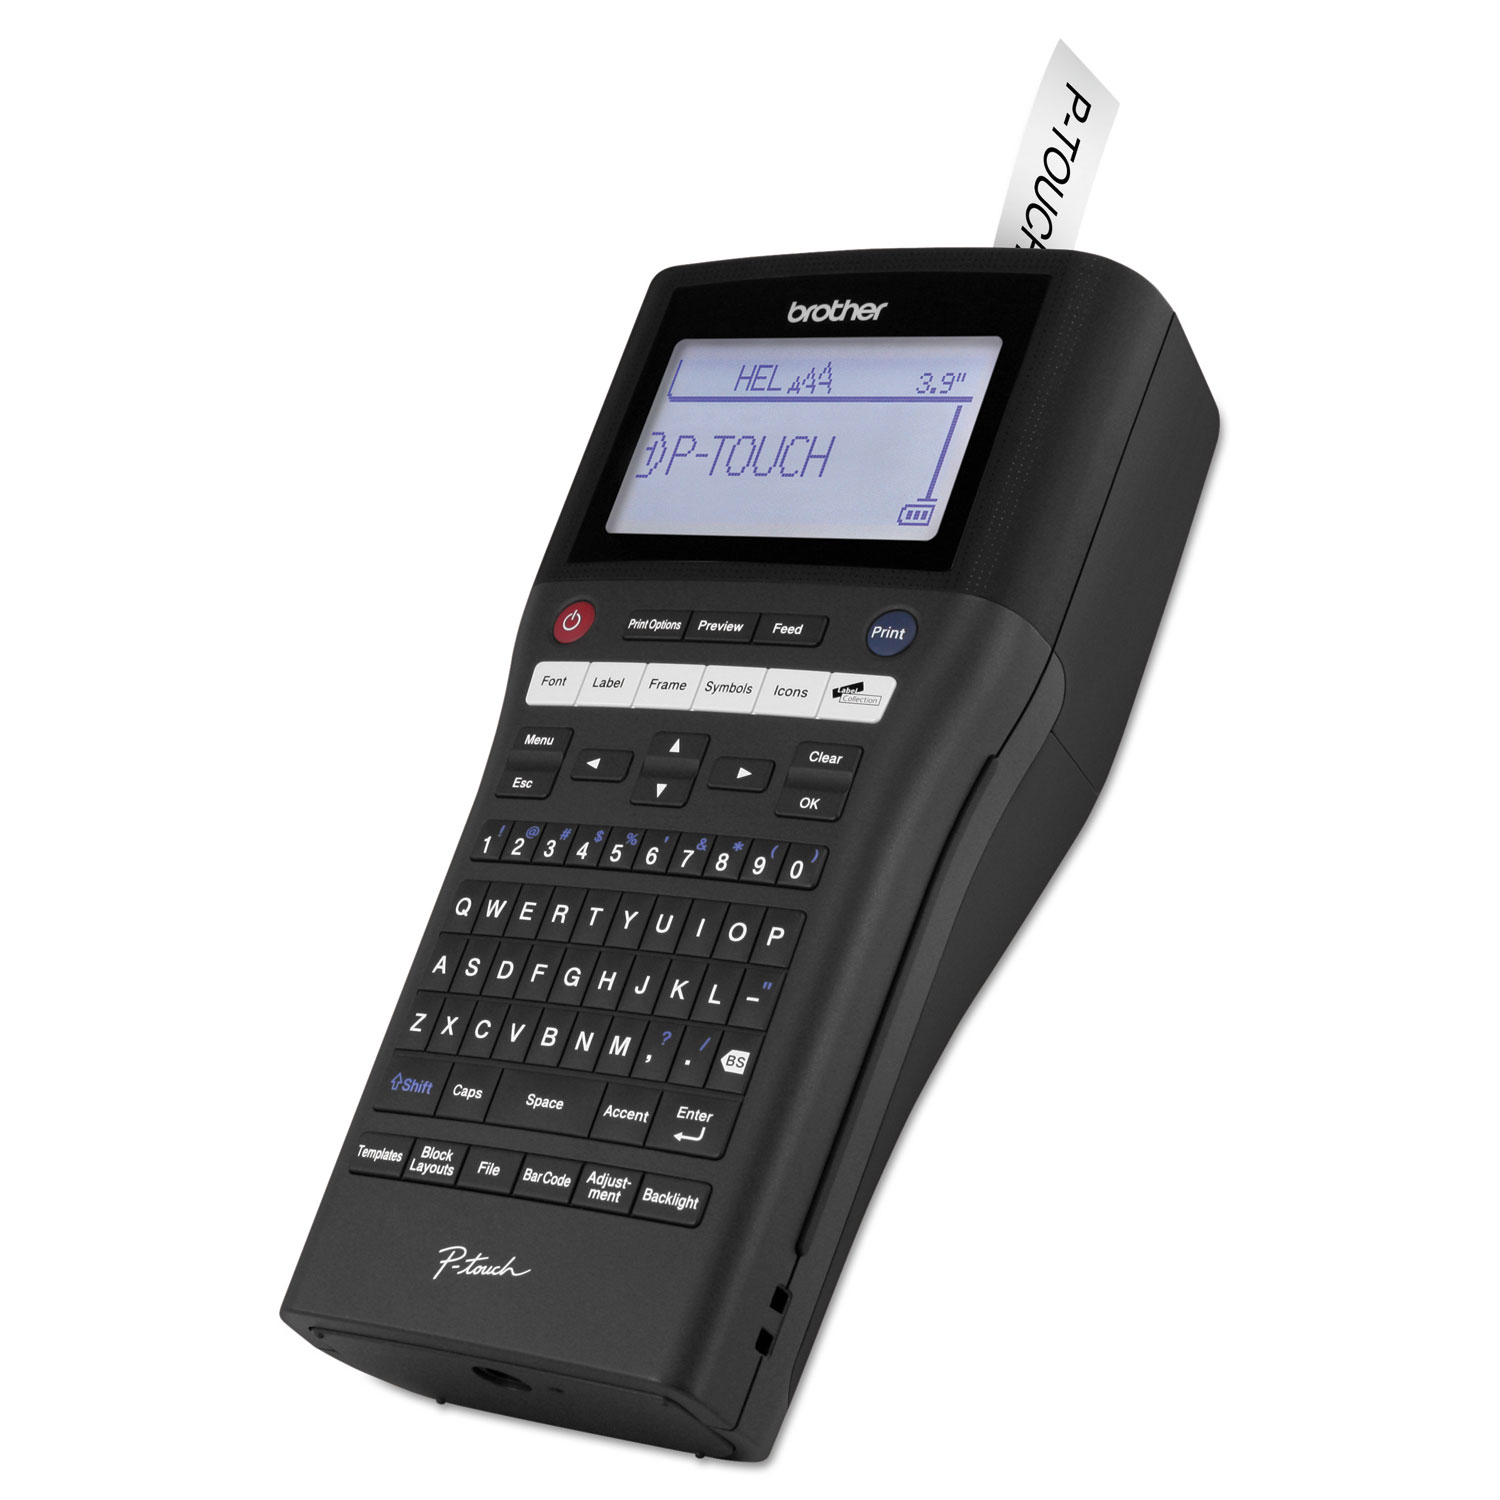 PT-H500LI Label Maker with Li-ion Battery and PC Connectivity